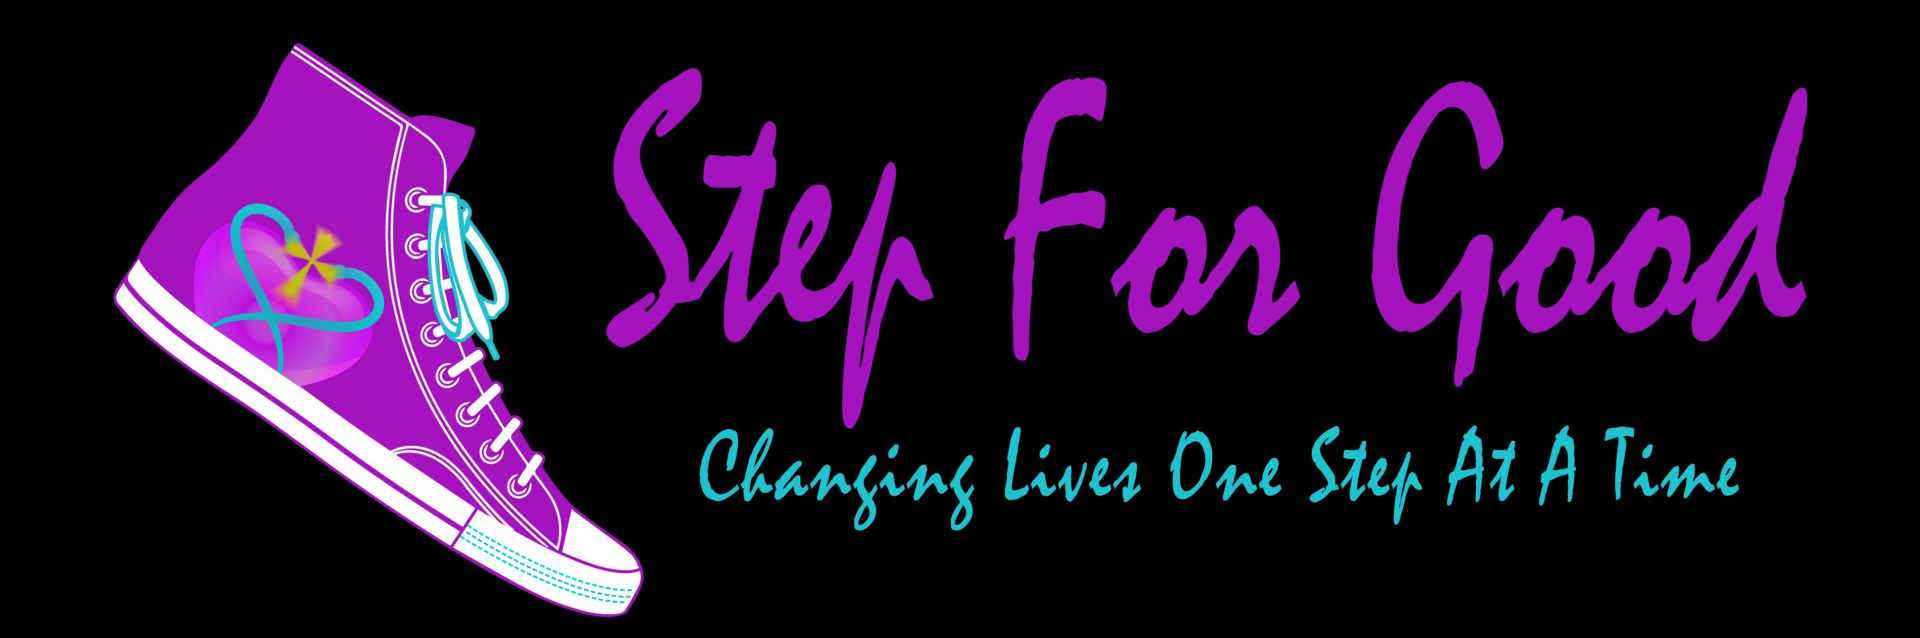 Taking Steps to End Domestic Violence , Virtual Walk-a-thon Challenge, October 2021, Online Event